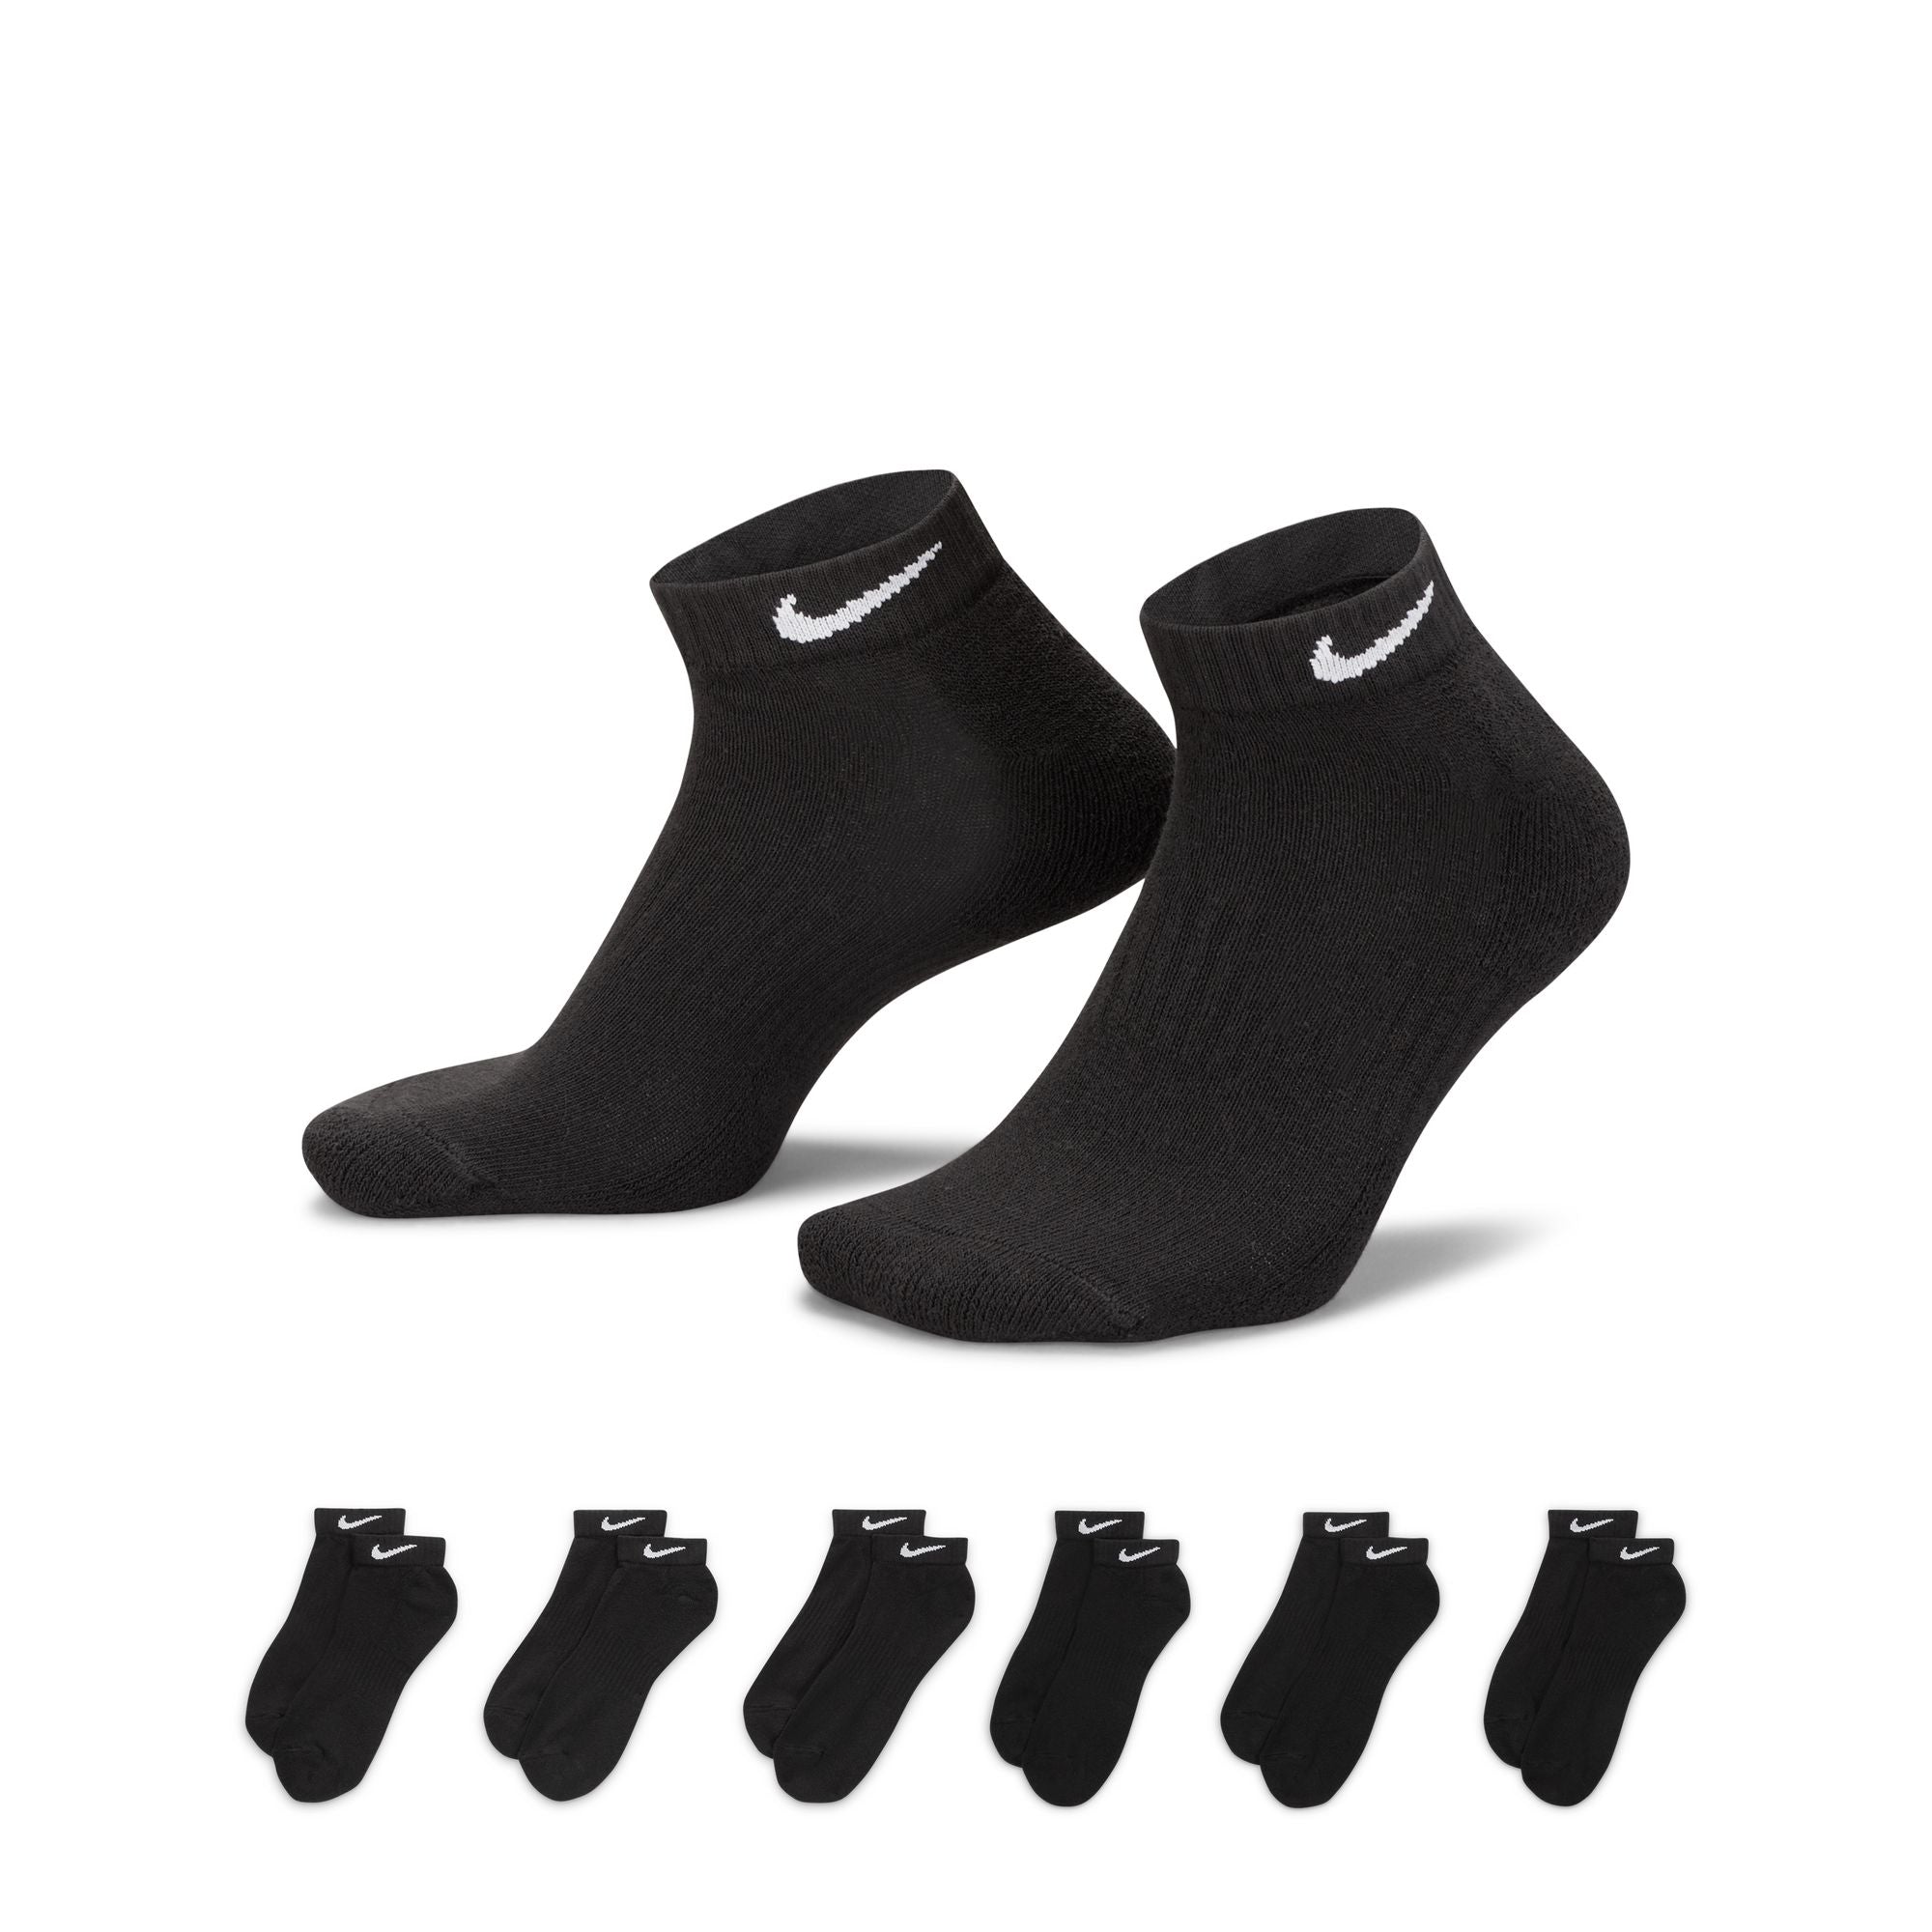 Everyday Cushion Low Socks (6 Pair) product image